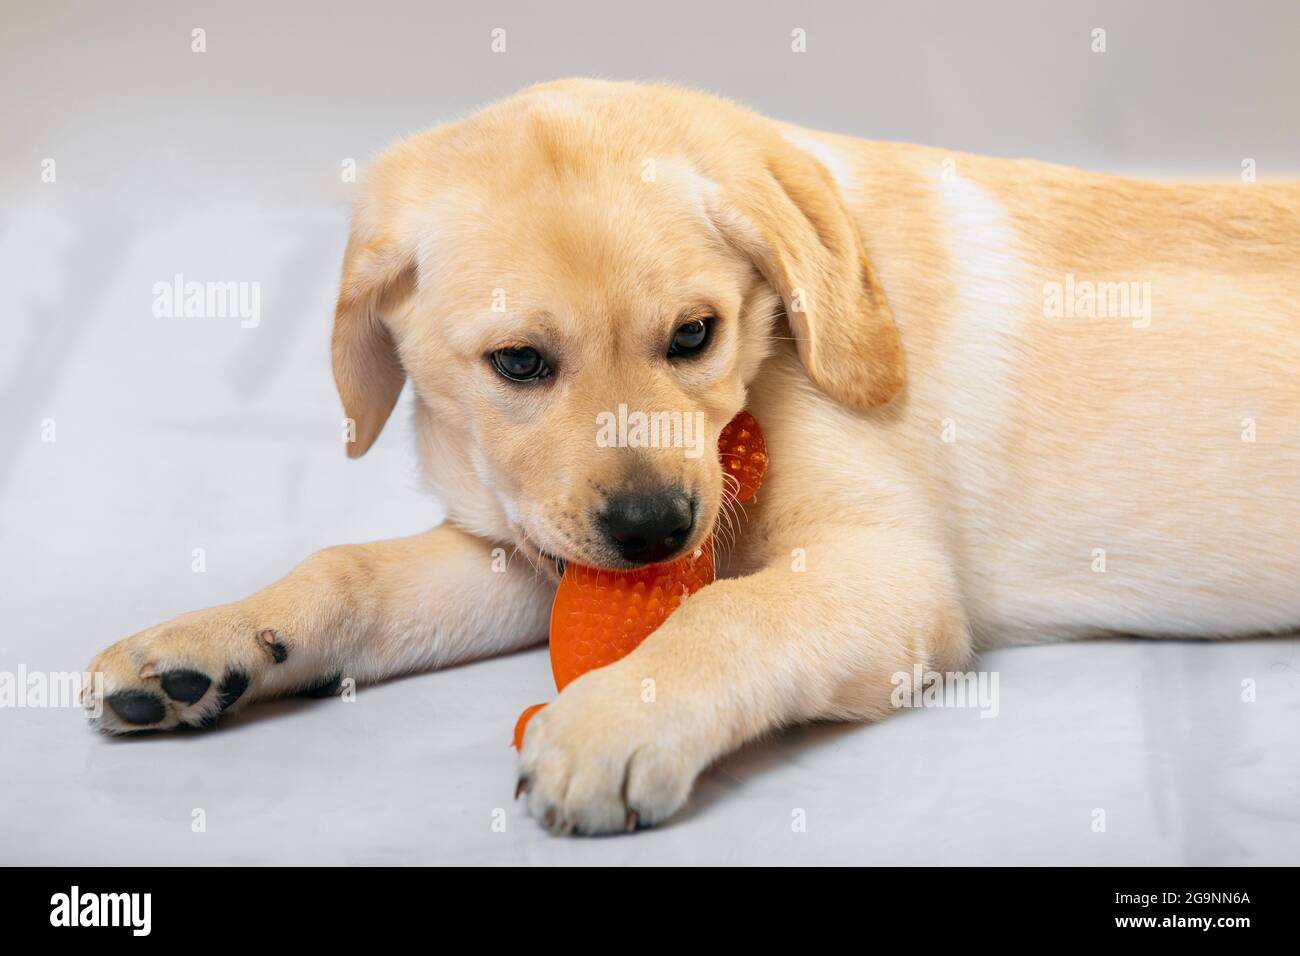 Little labrador retriever puppy lying on floor merrily biting orange plastic toy. Playful pets, curiosity, pet shop or veterinary clinic commercials Stock Photo